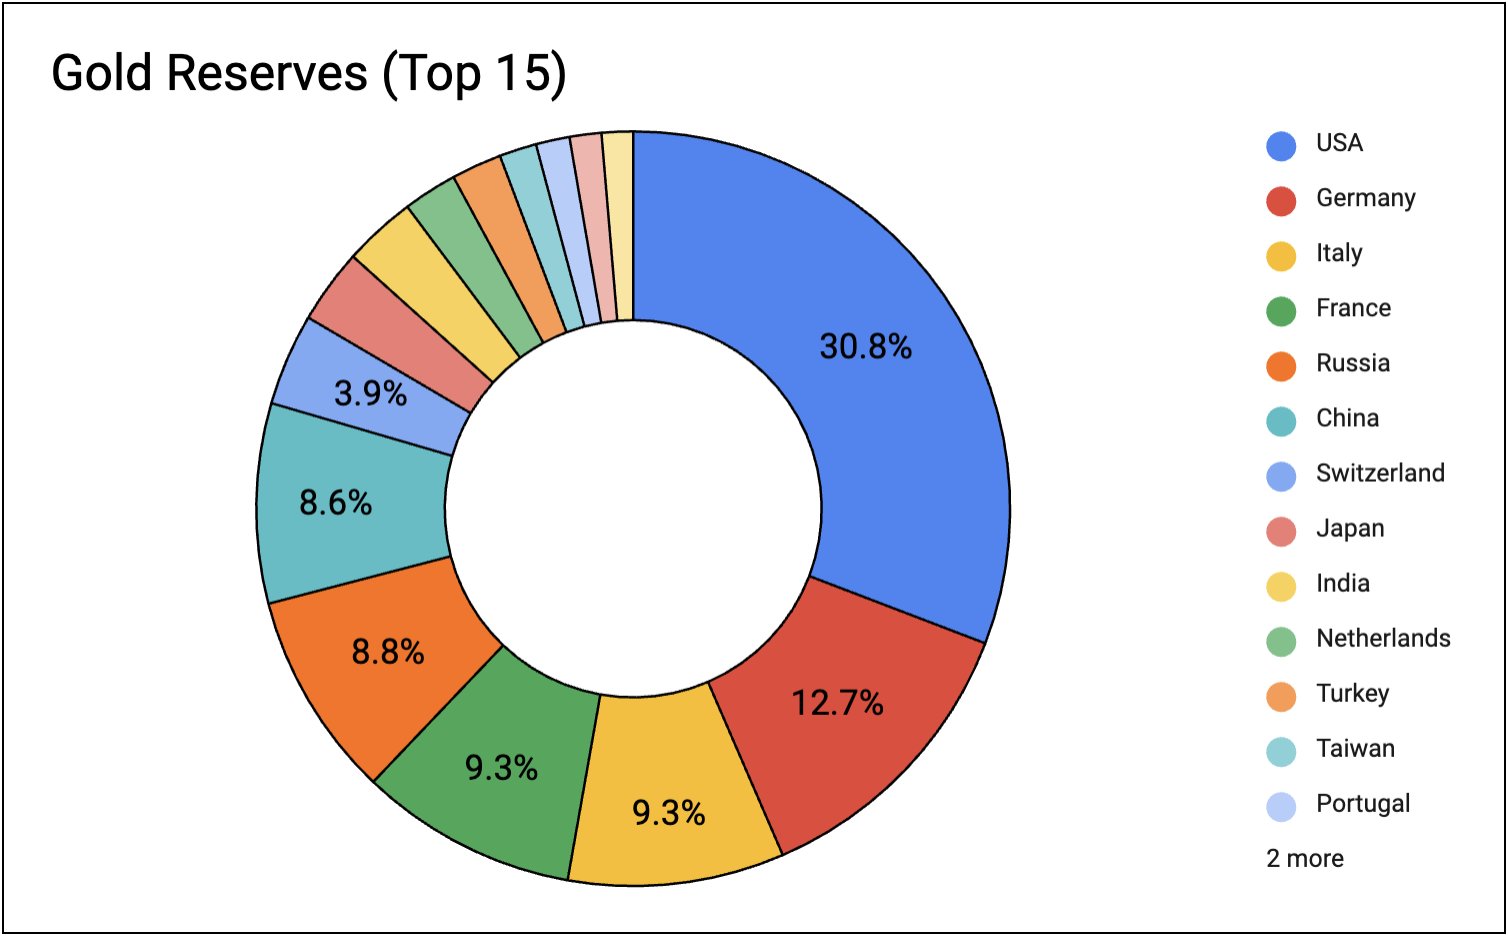 Gold reserves top 15